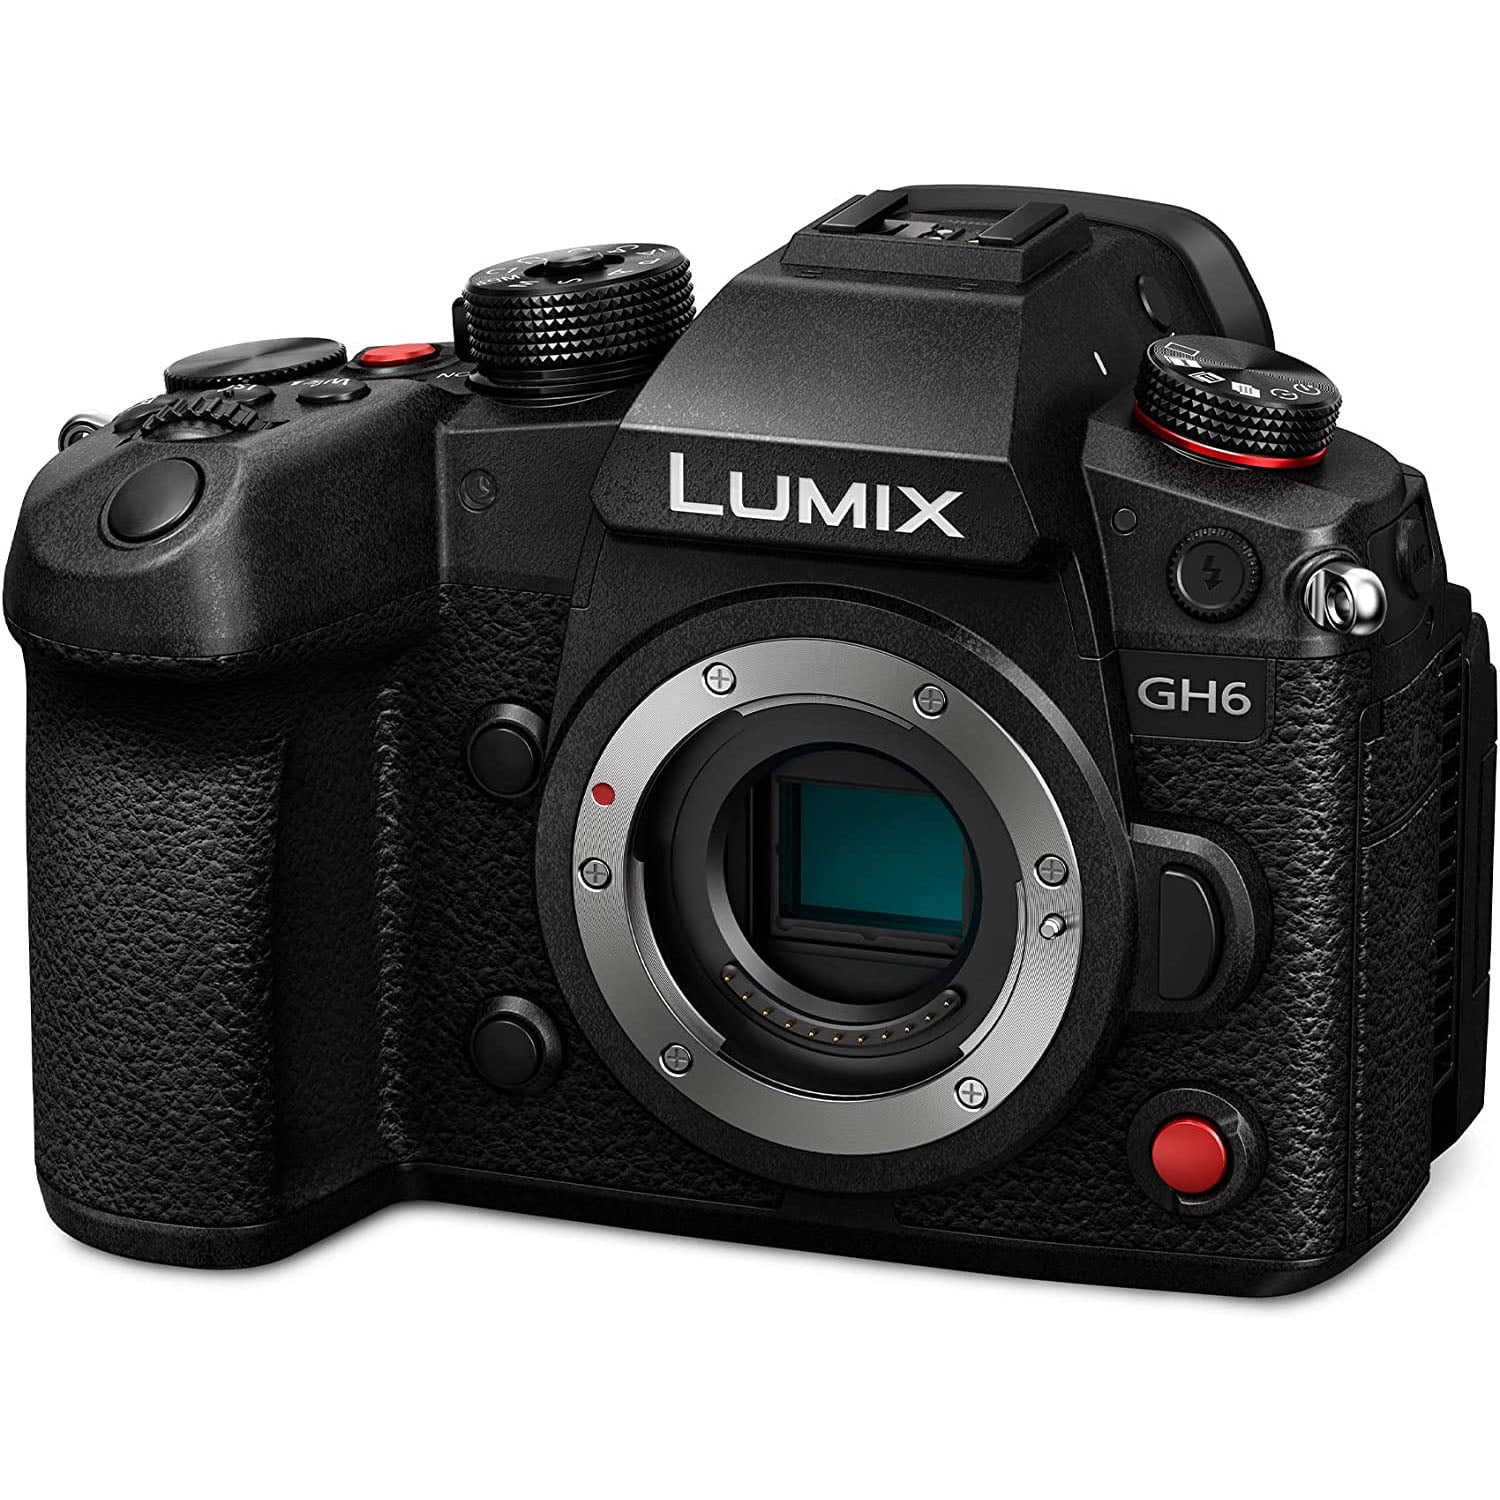 Mark speling Huichelaar Panasonic LUMIX GH6, 25.2MP Mirrorless Micro Four Thirds Camera with  Unlimited C4K/4K 4:2:2 10-bit Video Recording, 7.5-Stop 5-Axis Dual Image  Stabilizer ? DC-GH6BODY - Walmart.com